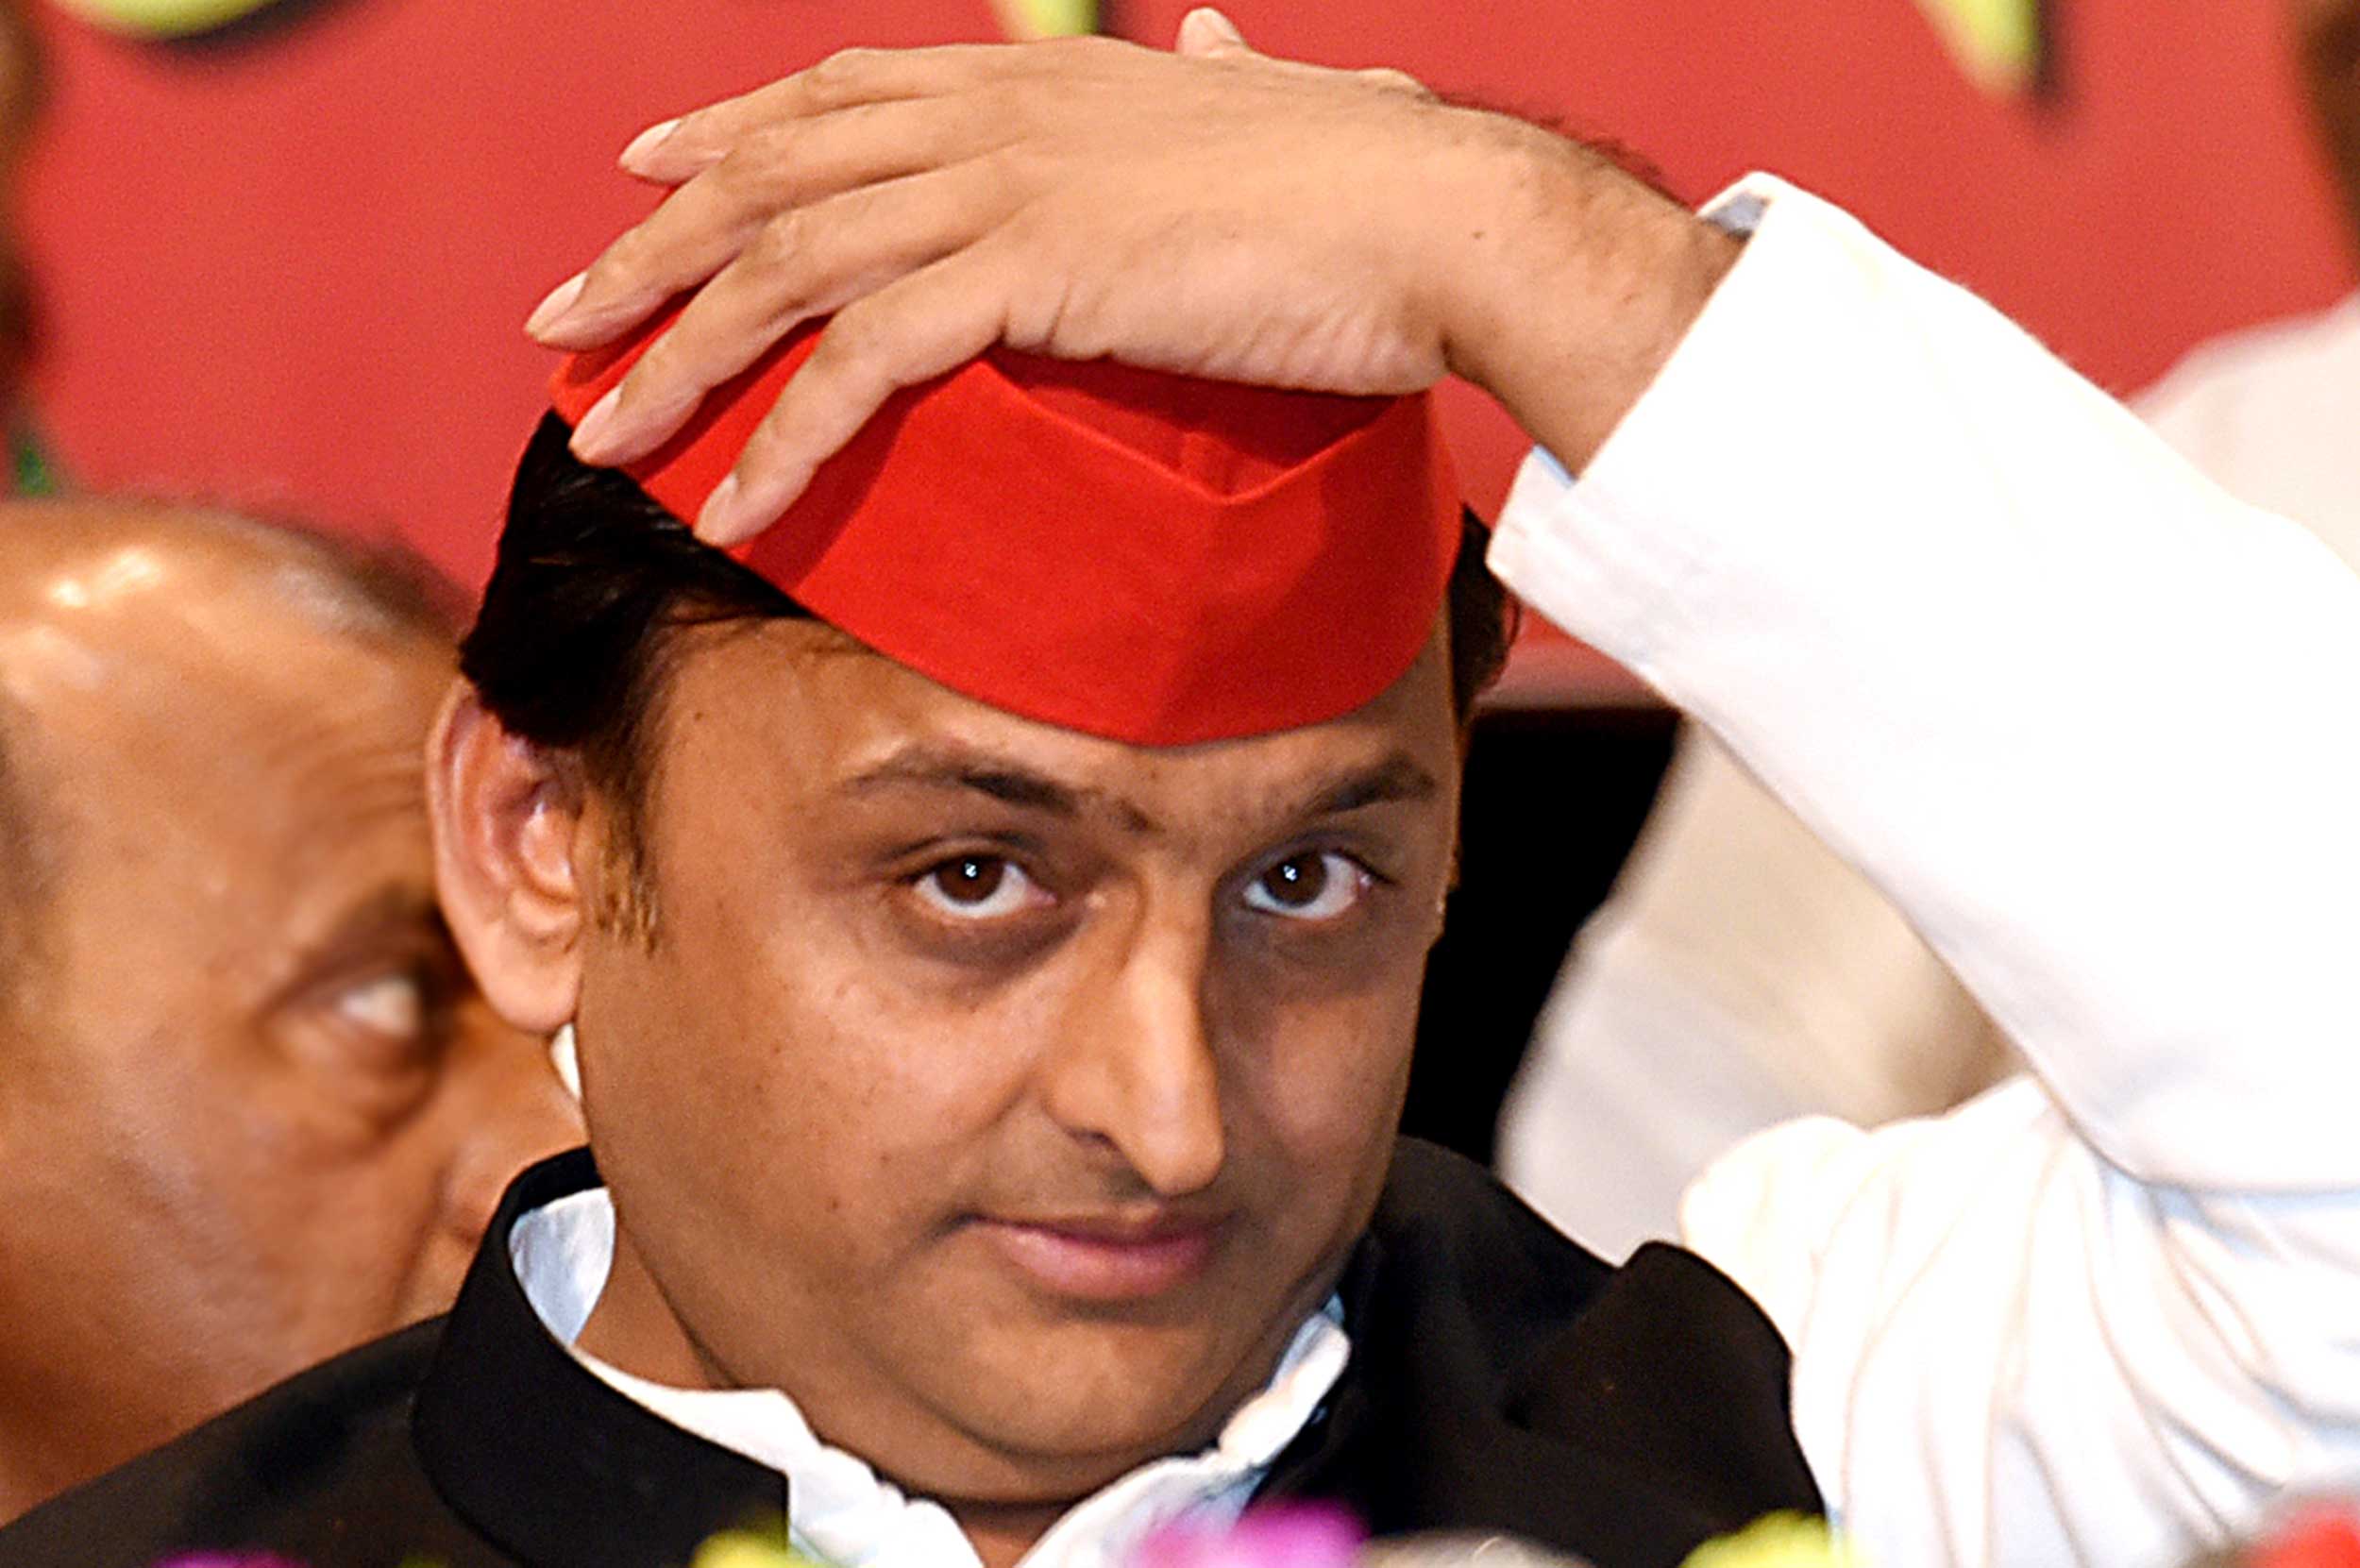 Akhilesh Yadav (in picture) and Om Prakash Rajbhar, who heads the SBSP, had met at least twice in the past two days to discuss their joint strategy for 13 vacant seats where the Election Commission may announce polls in October.
